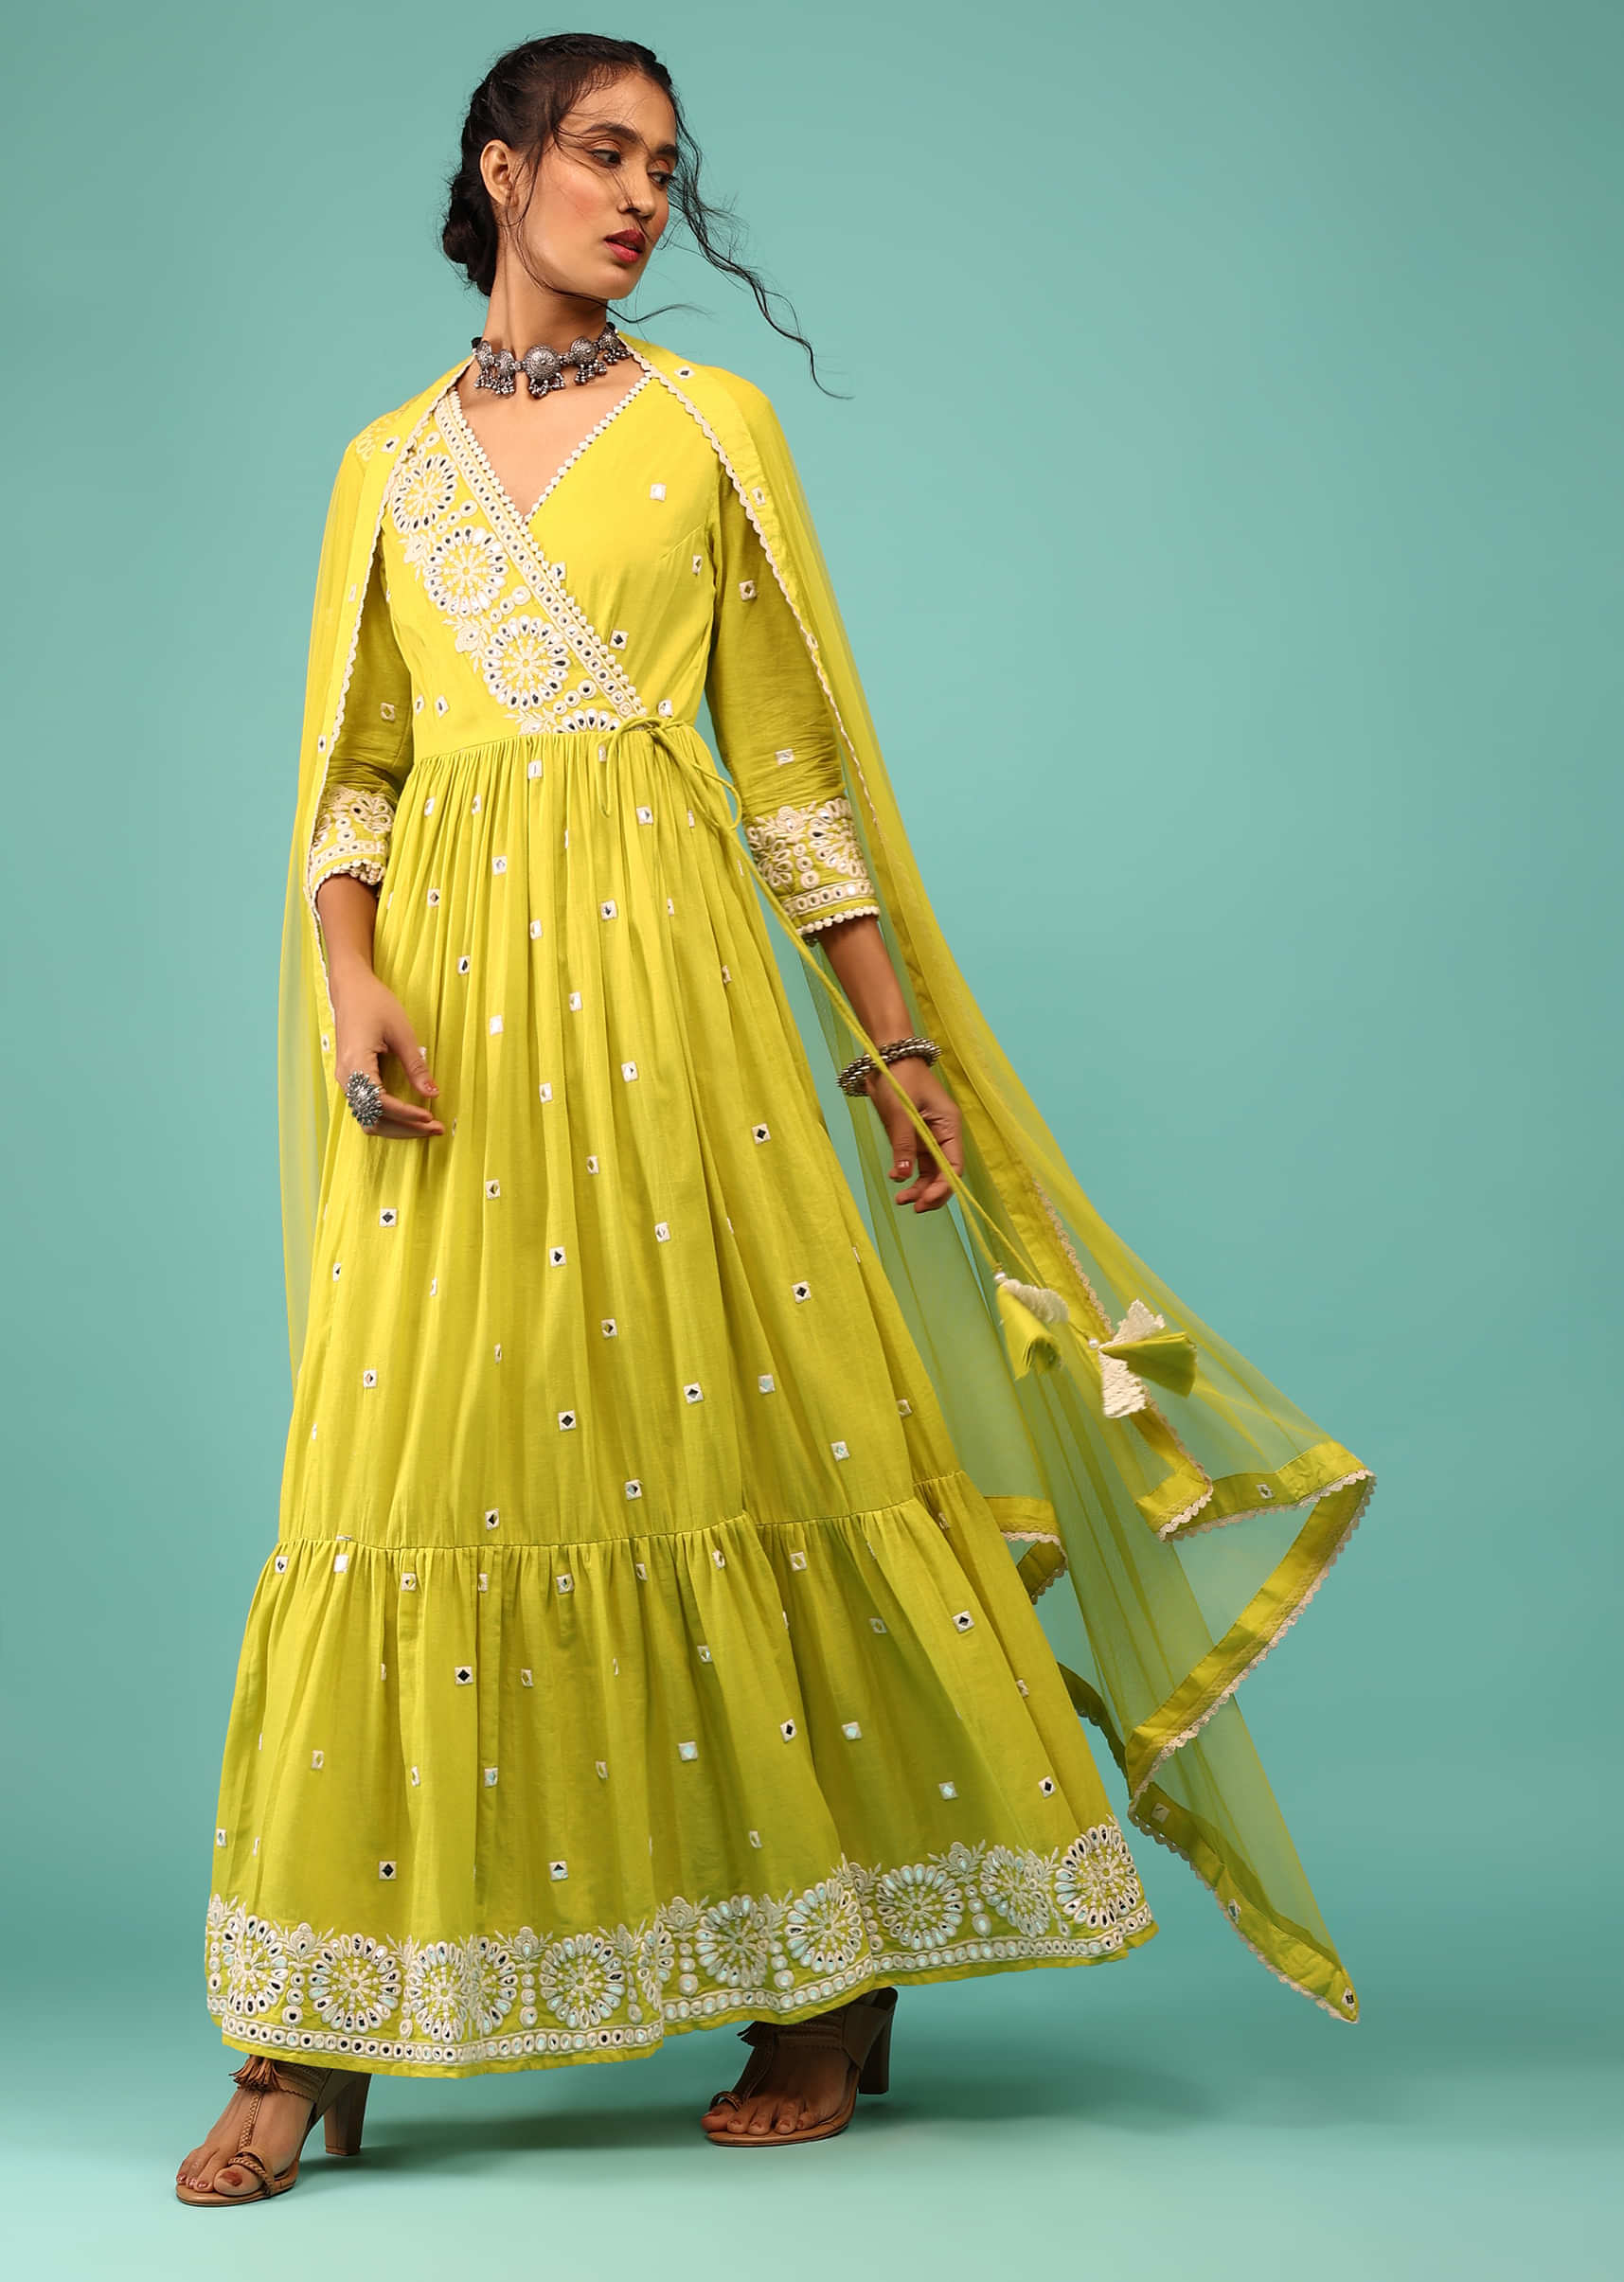 Green Sheen Anarkali Kurta In Lucknowi Floral Embroidery With Angrakha Pattern & Surplice Neckline